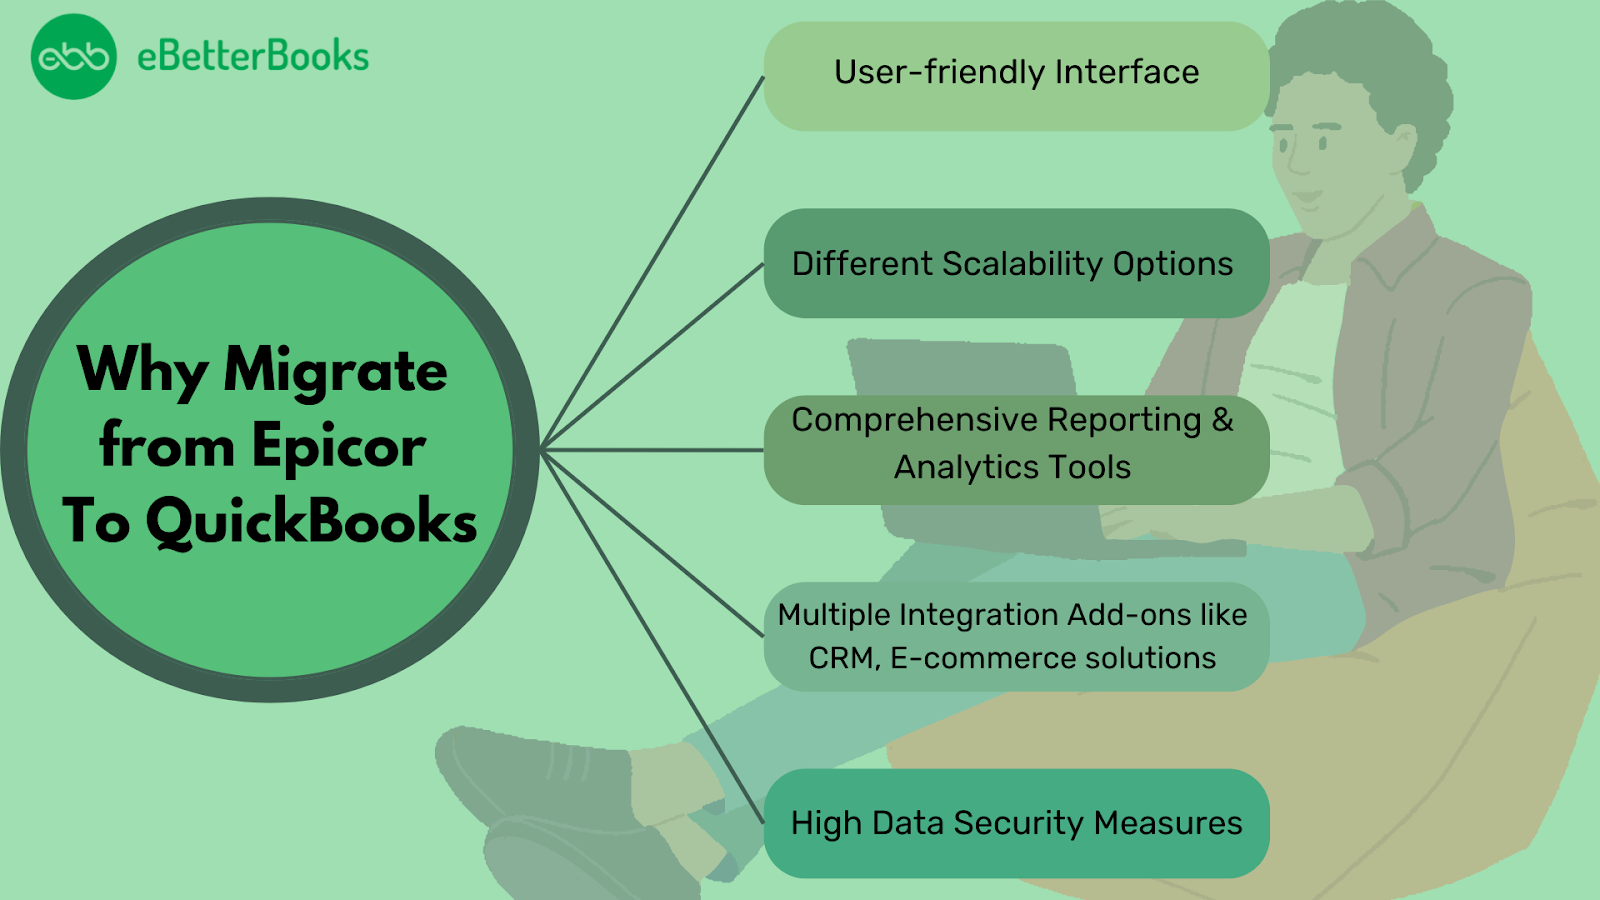 Why move from Epicor to QuickBooks?